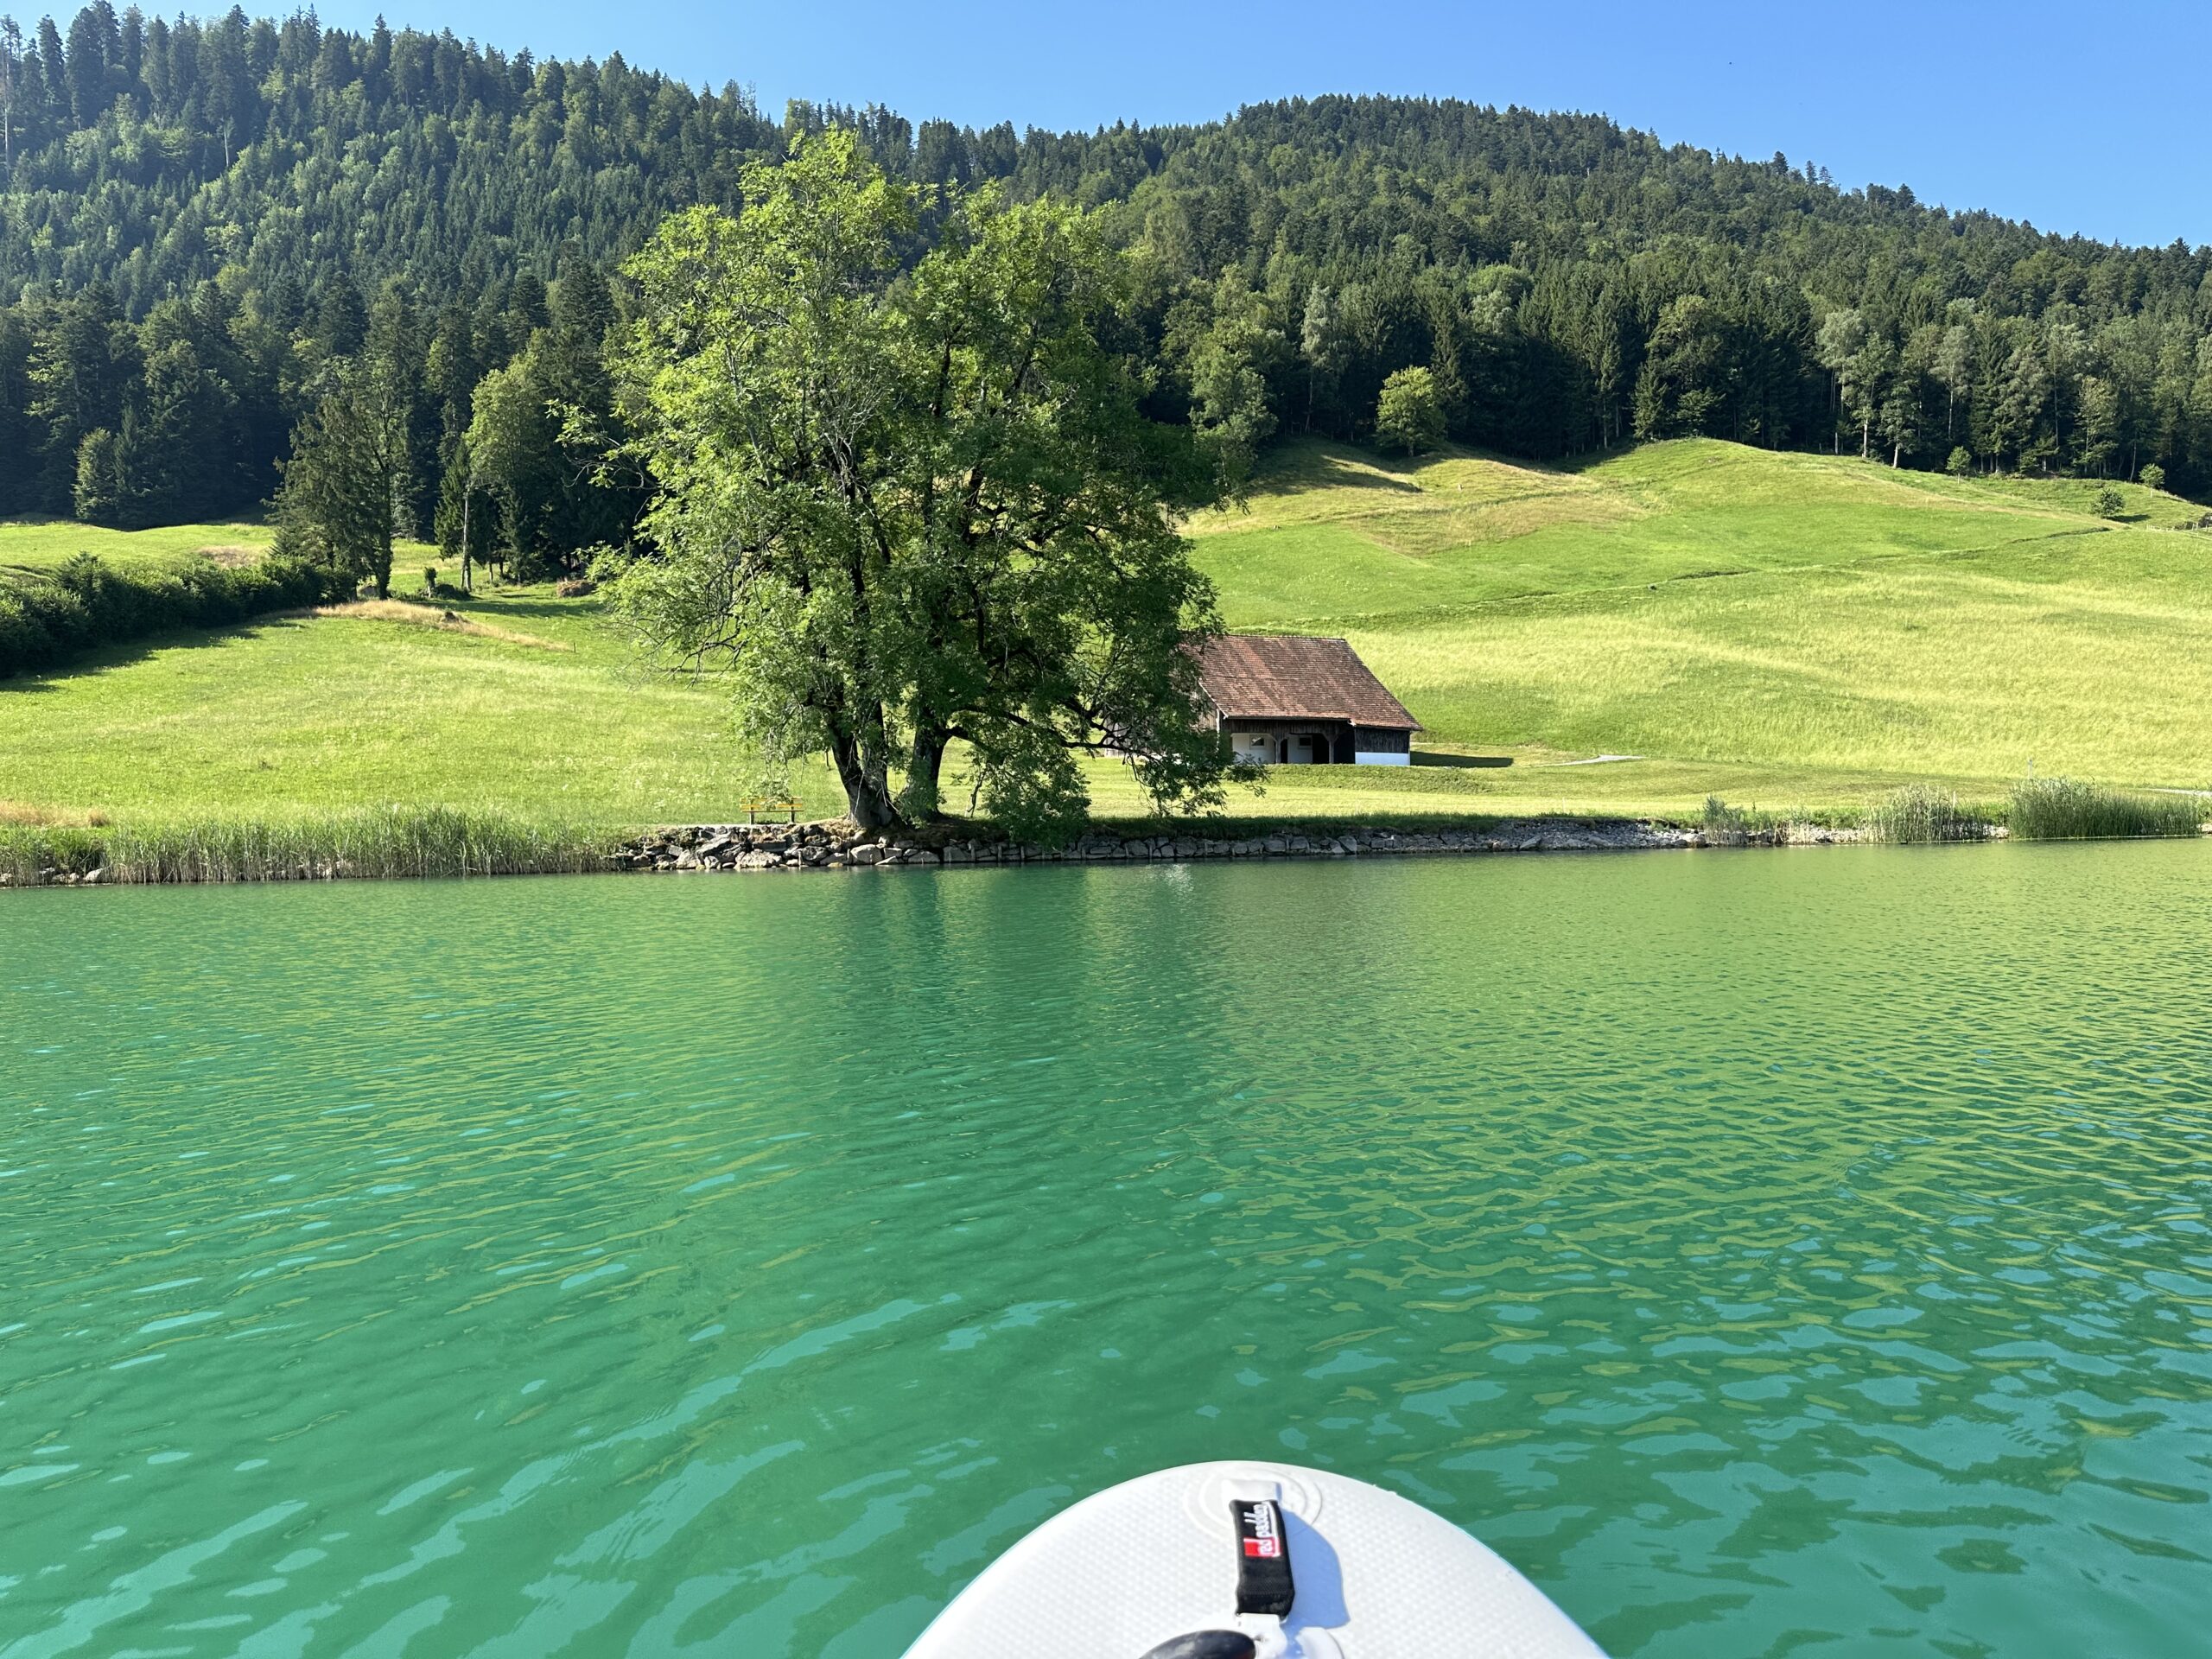 Vista of green pastures and forest under blue skies taken from a standup paddle board floating in a lake. The lake water glows green from the reflected vegetation.